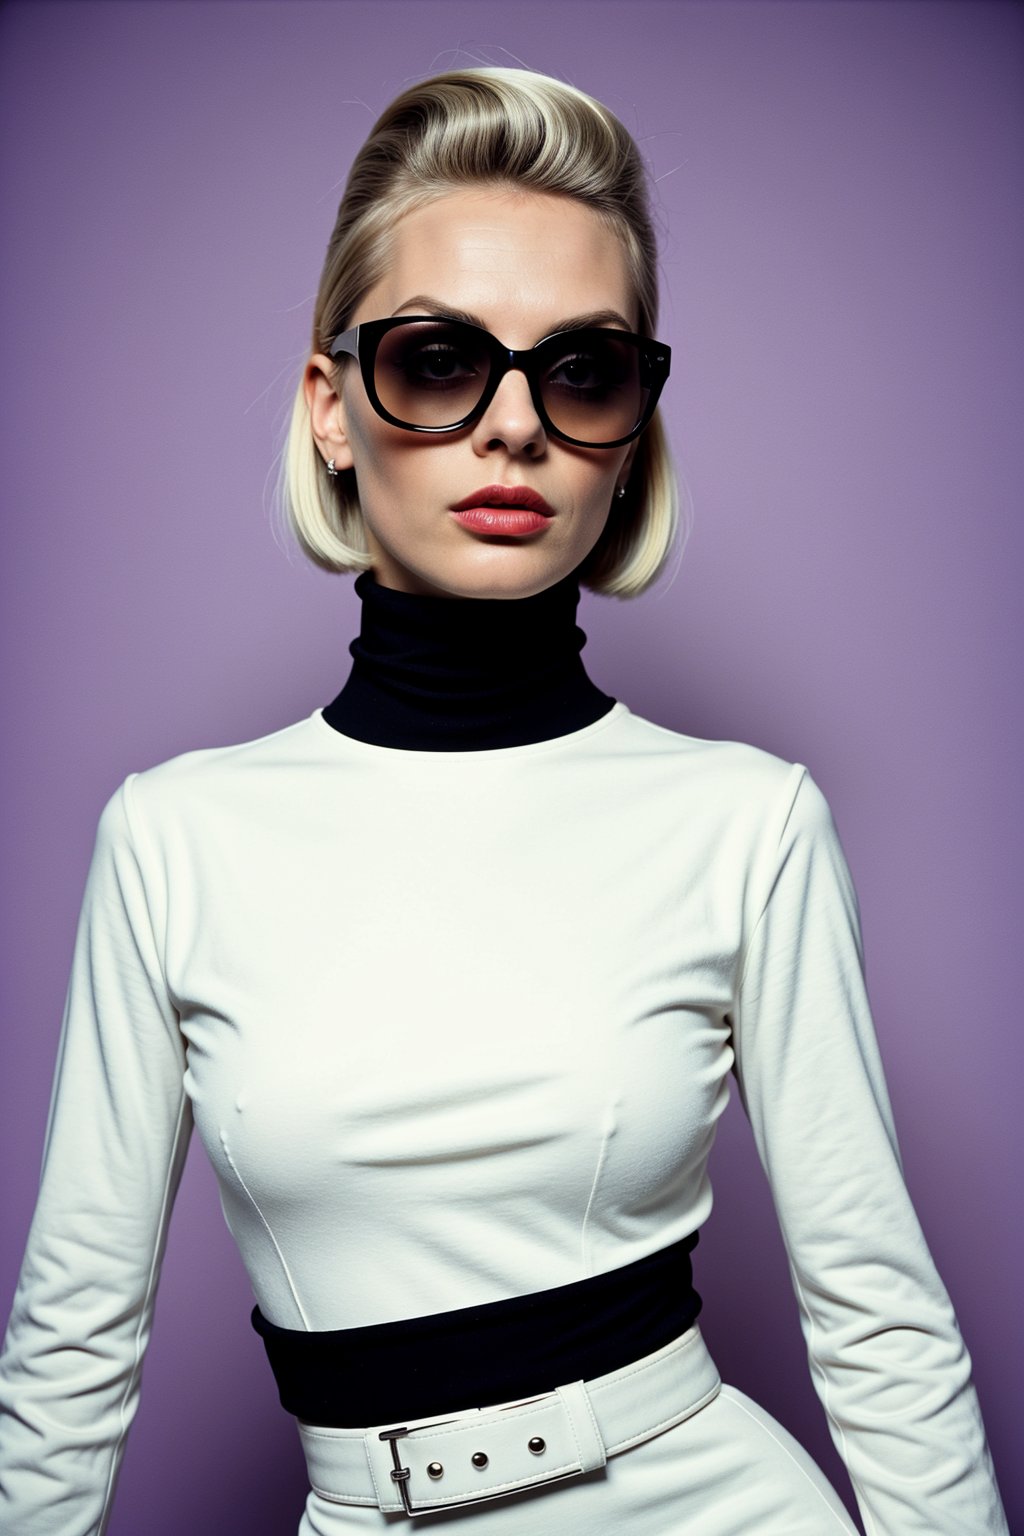 close up Photography, in front of black wall, a punk 80's British model woman with 50's platinum haircut, in a white turtleneck dress and oversized sunglasses, frontal view, Retro Futuristic Style, Salvador Dali Utopia ,DreamOn,,<lora:659111690174031528:1.0>